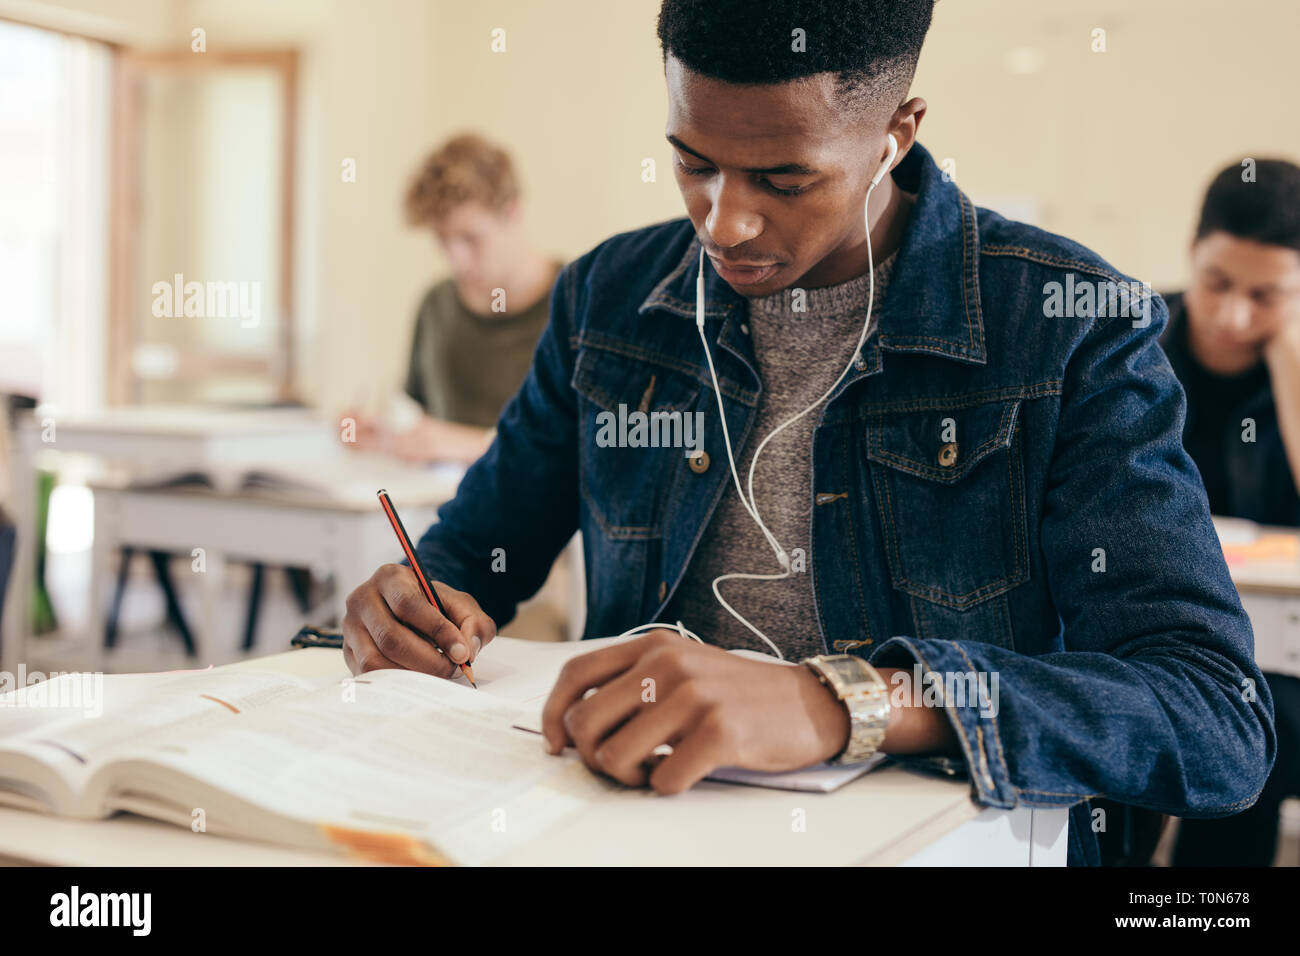 Teenage boy sitting in high school classroom writing in book. Male student with earphones on, making notes during lecture in college classroom. Stock Photo